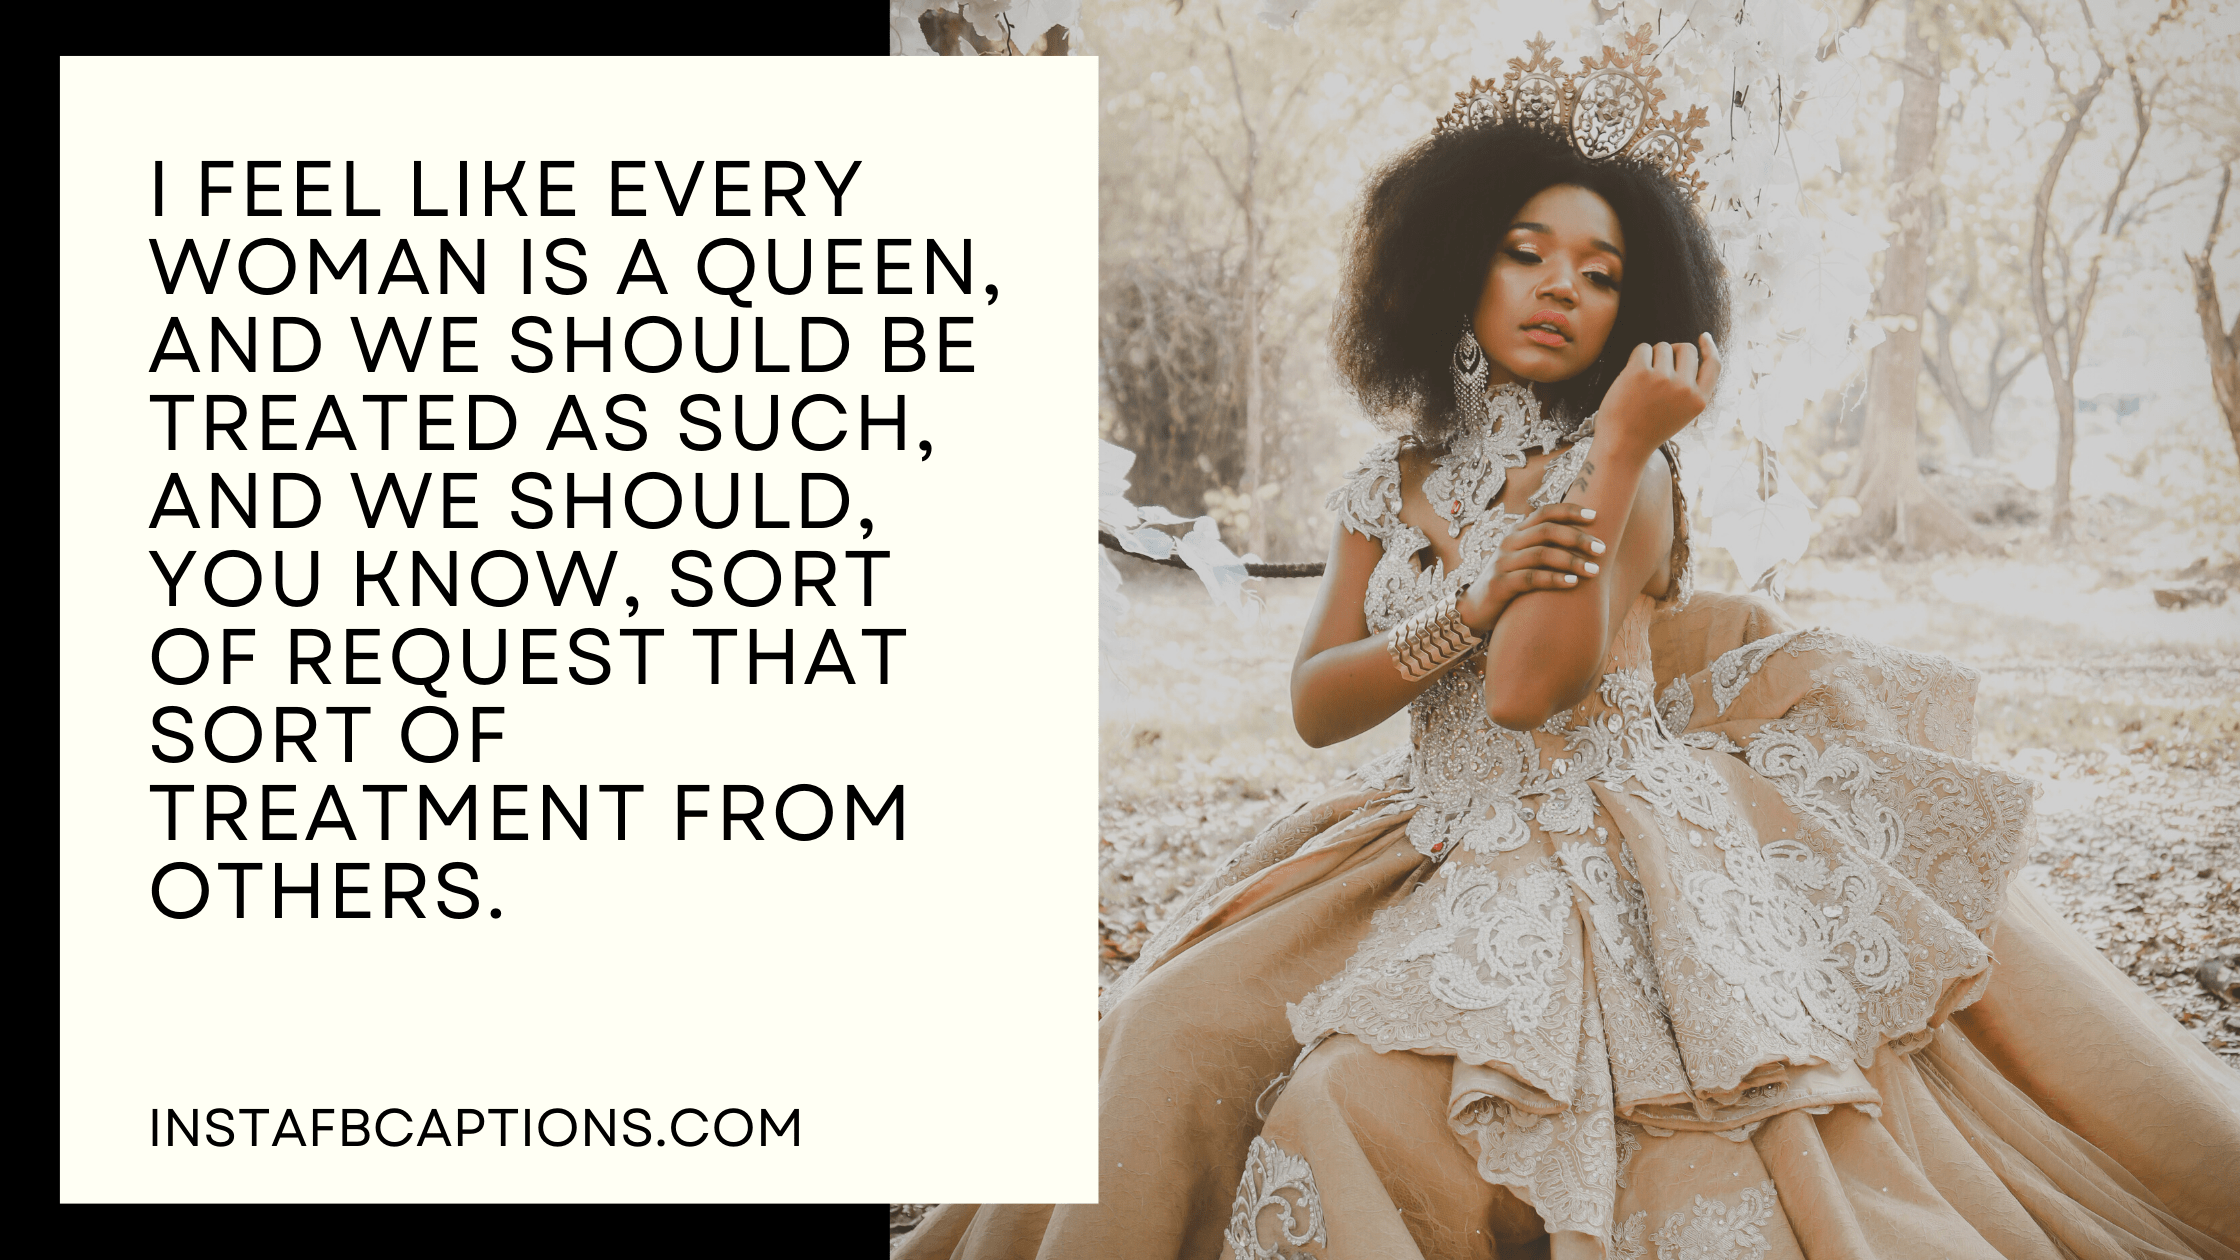 I feel like every woman is a queen, and we should be treated as such, and we should, you know, sort of request that sort of treatment from others.  - Attitude Queen Captions  - [120+] Queen Captions for Girls Instagram Photos in 2023